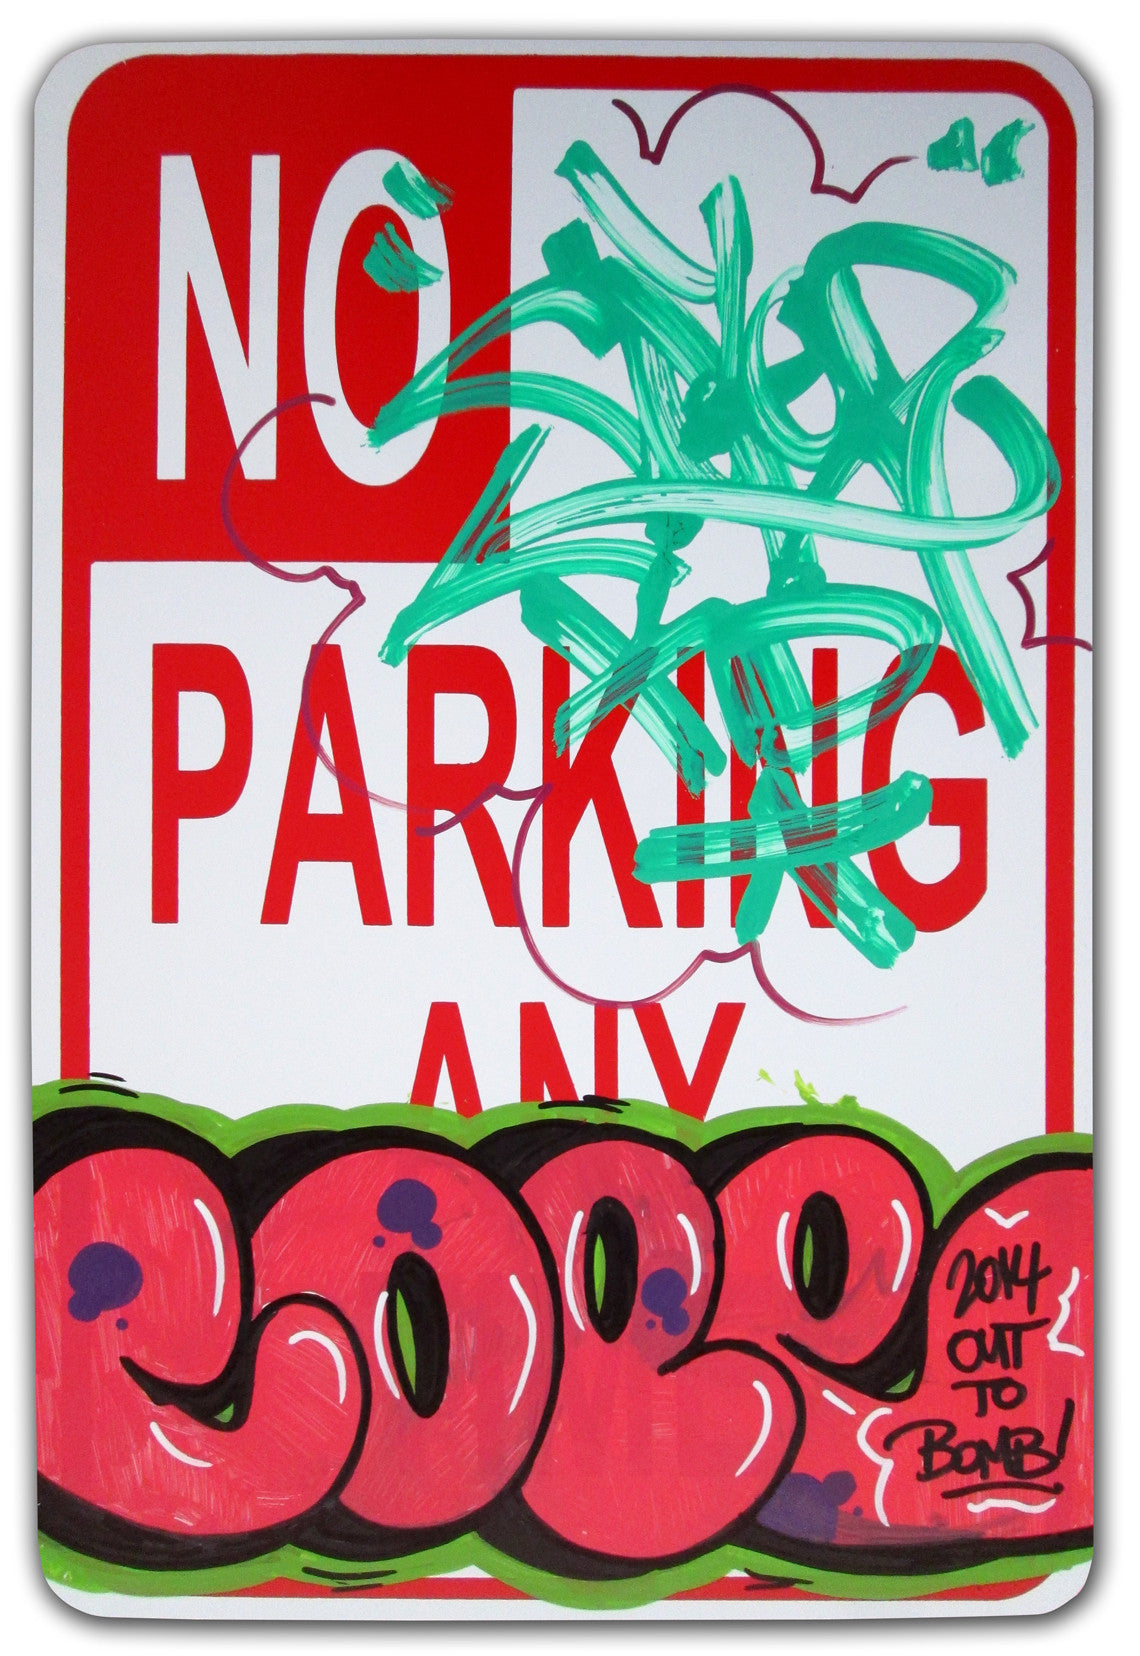 COPE 2 - "Out to Bomb" No Parking Sign